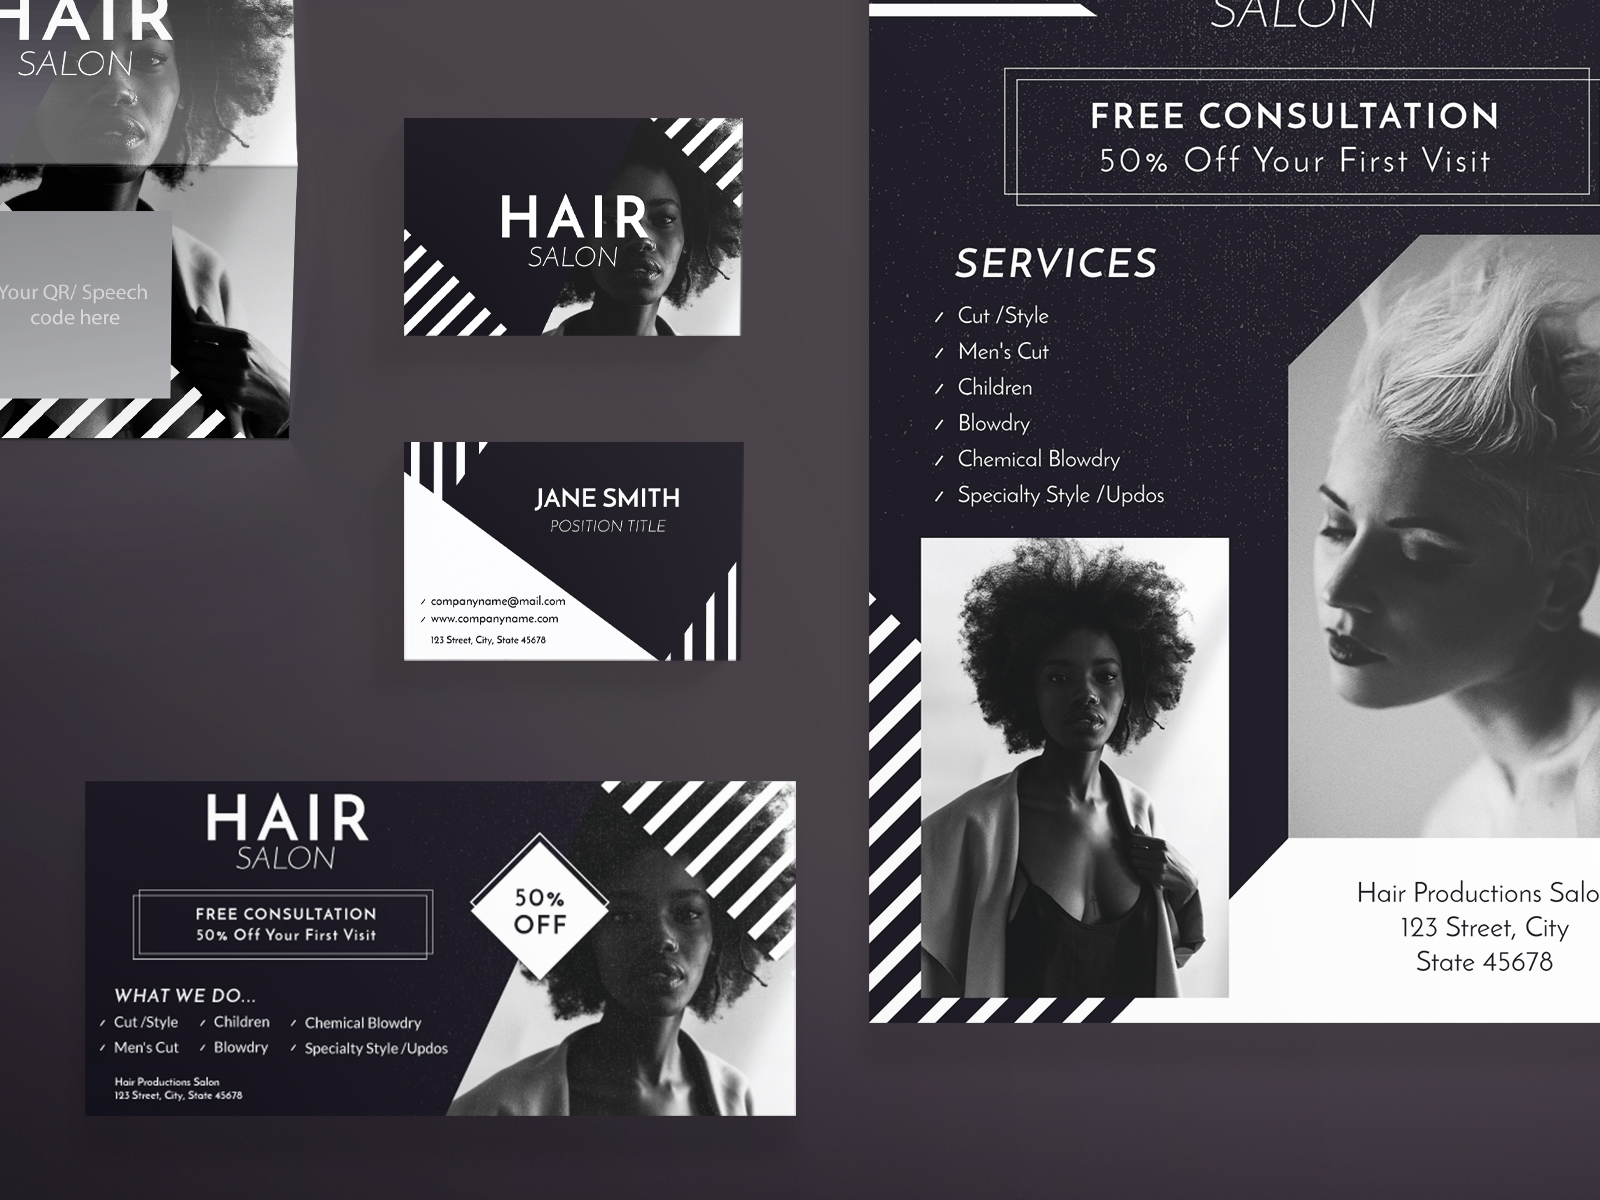 Hair Salon | Modern and Creative Templates Suite by Amber Graphics on ...